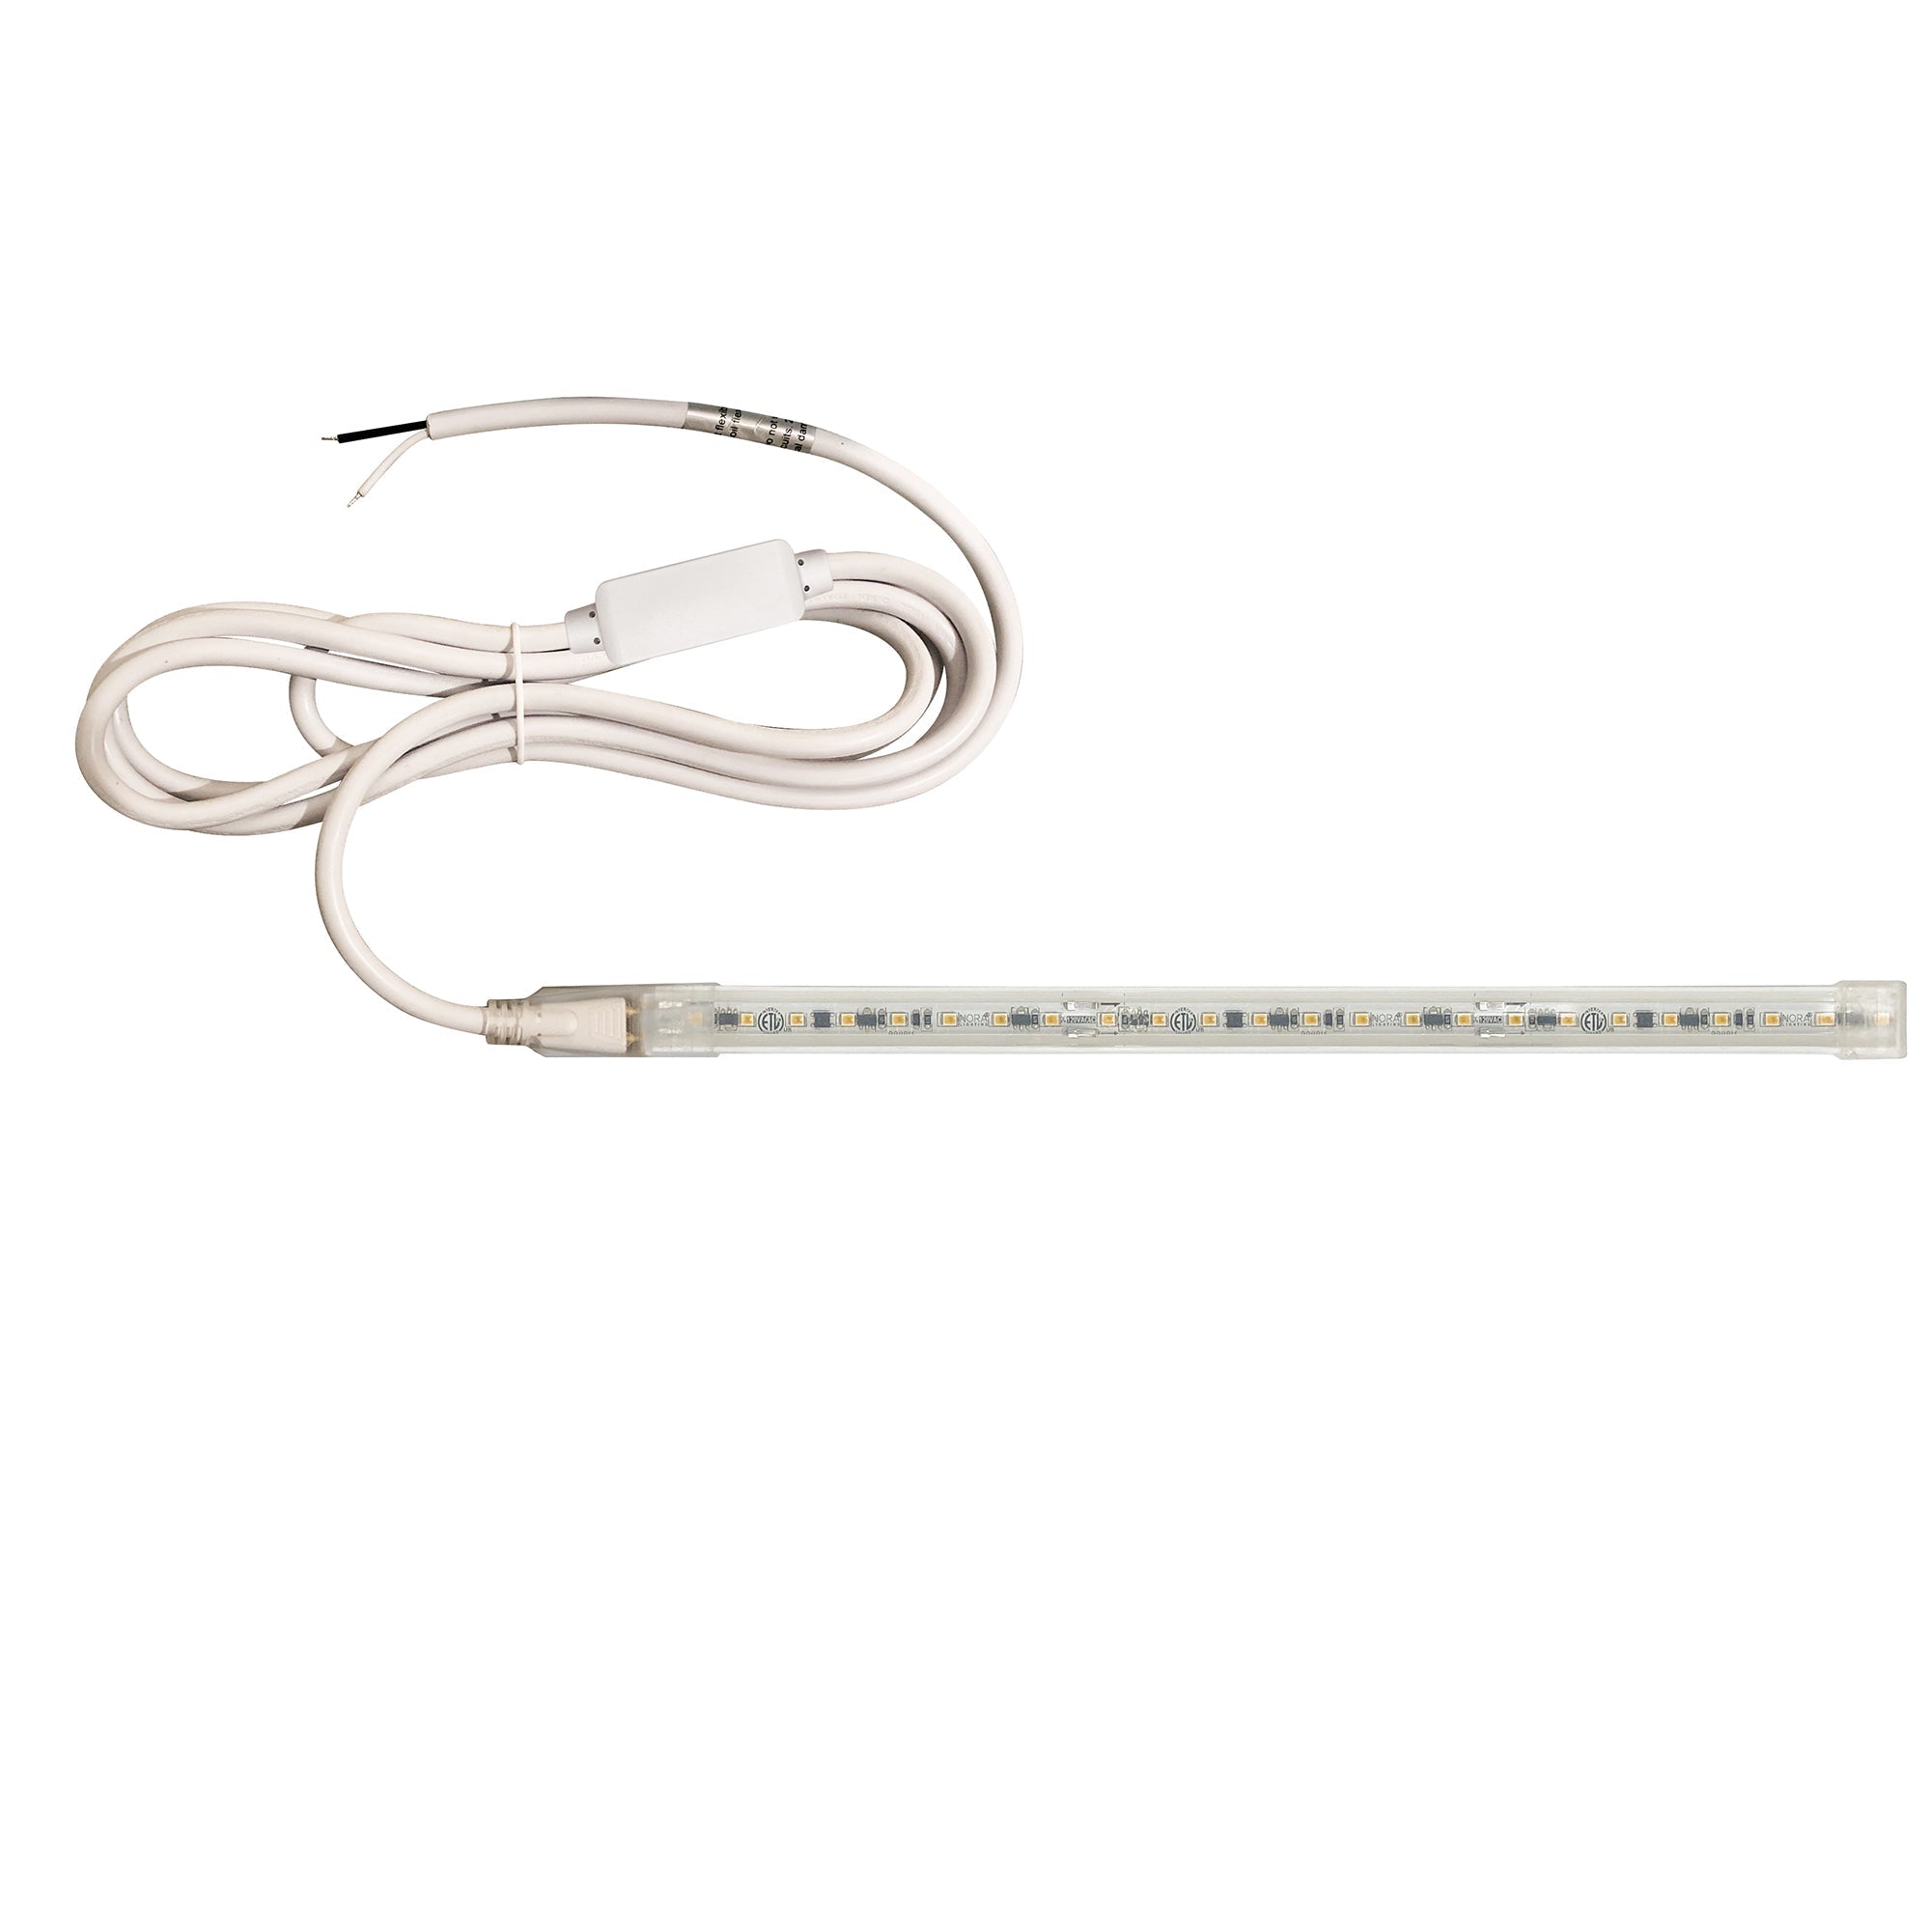 Nora Lighting NUTP13-W7-12-930/HWSP - Accent / Undercabinet - Custom Cut 7-ft 120V Continuous LED Tape Light, 330lm / 3.6W per foot, 3000K, w/ Mounting Clips and 8' Hardwired Power Cord w/ Surge Protector